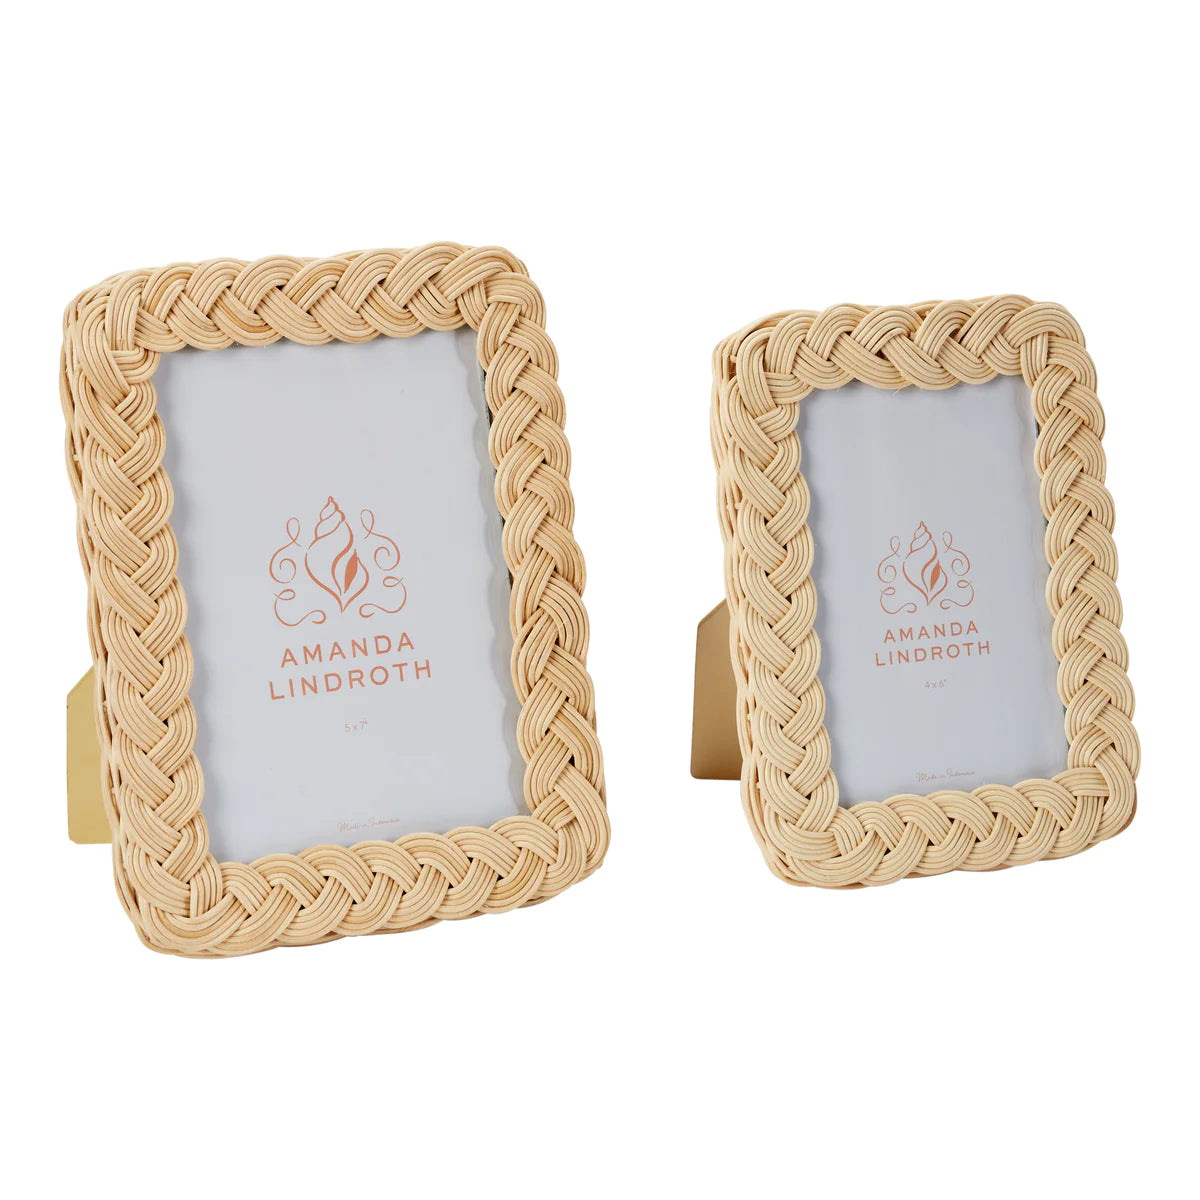 Amanda Lindroth Braided Picture Frame - (two sizes)